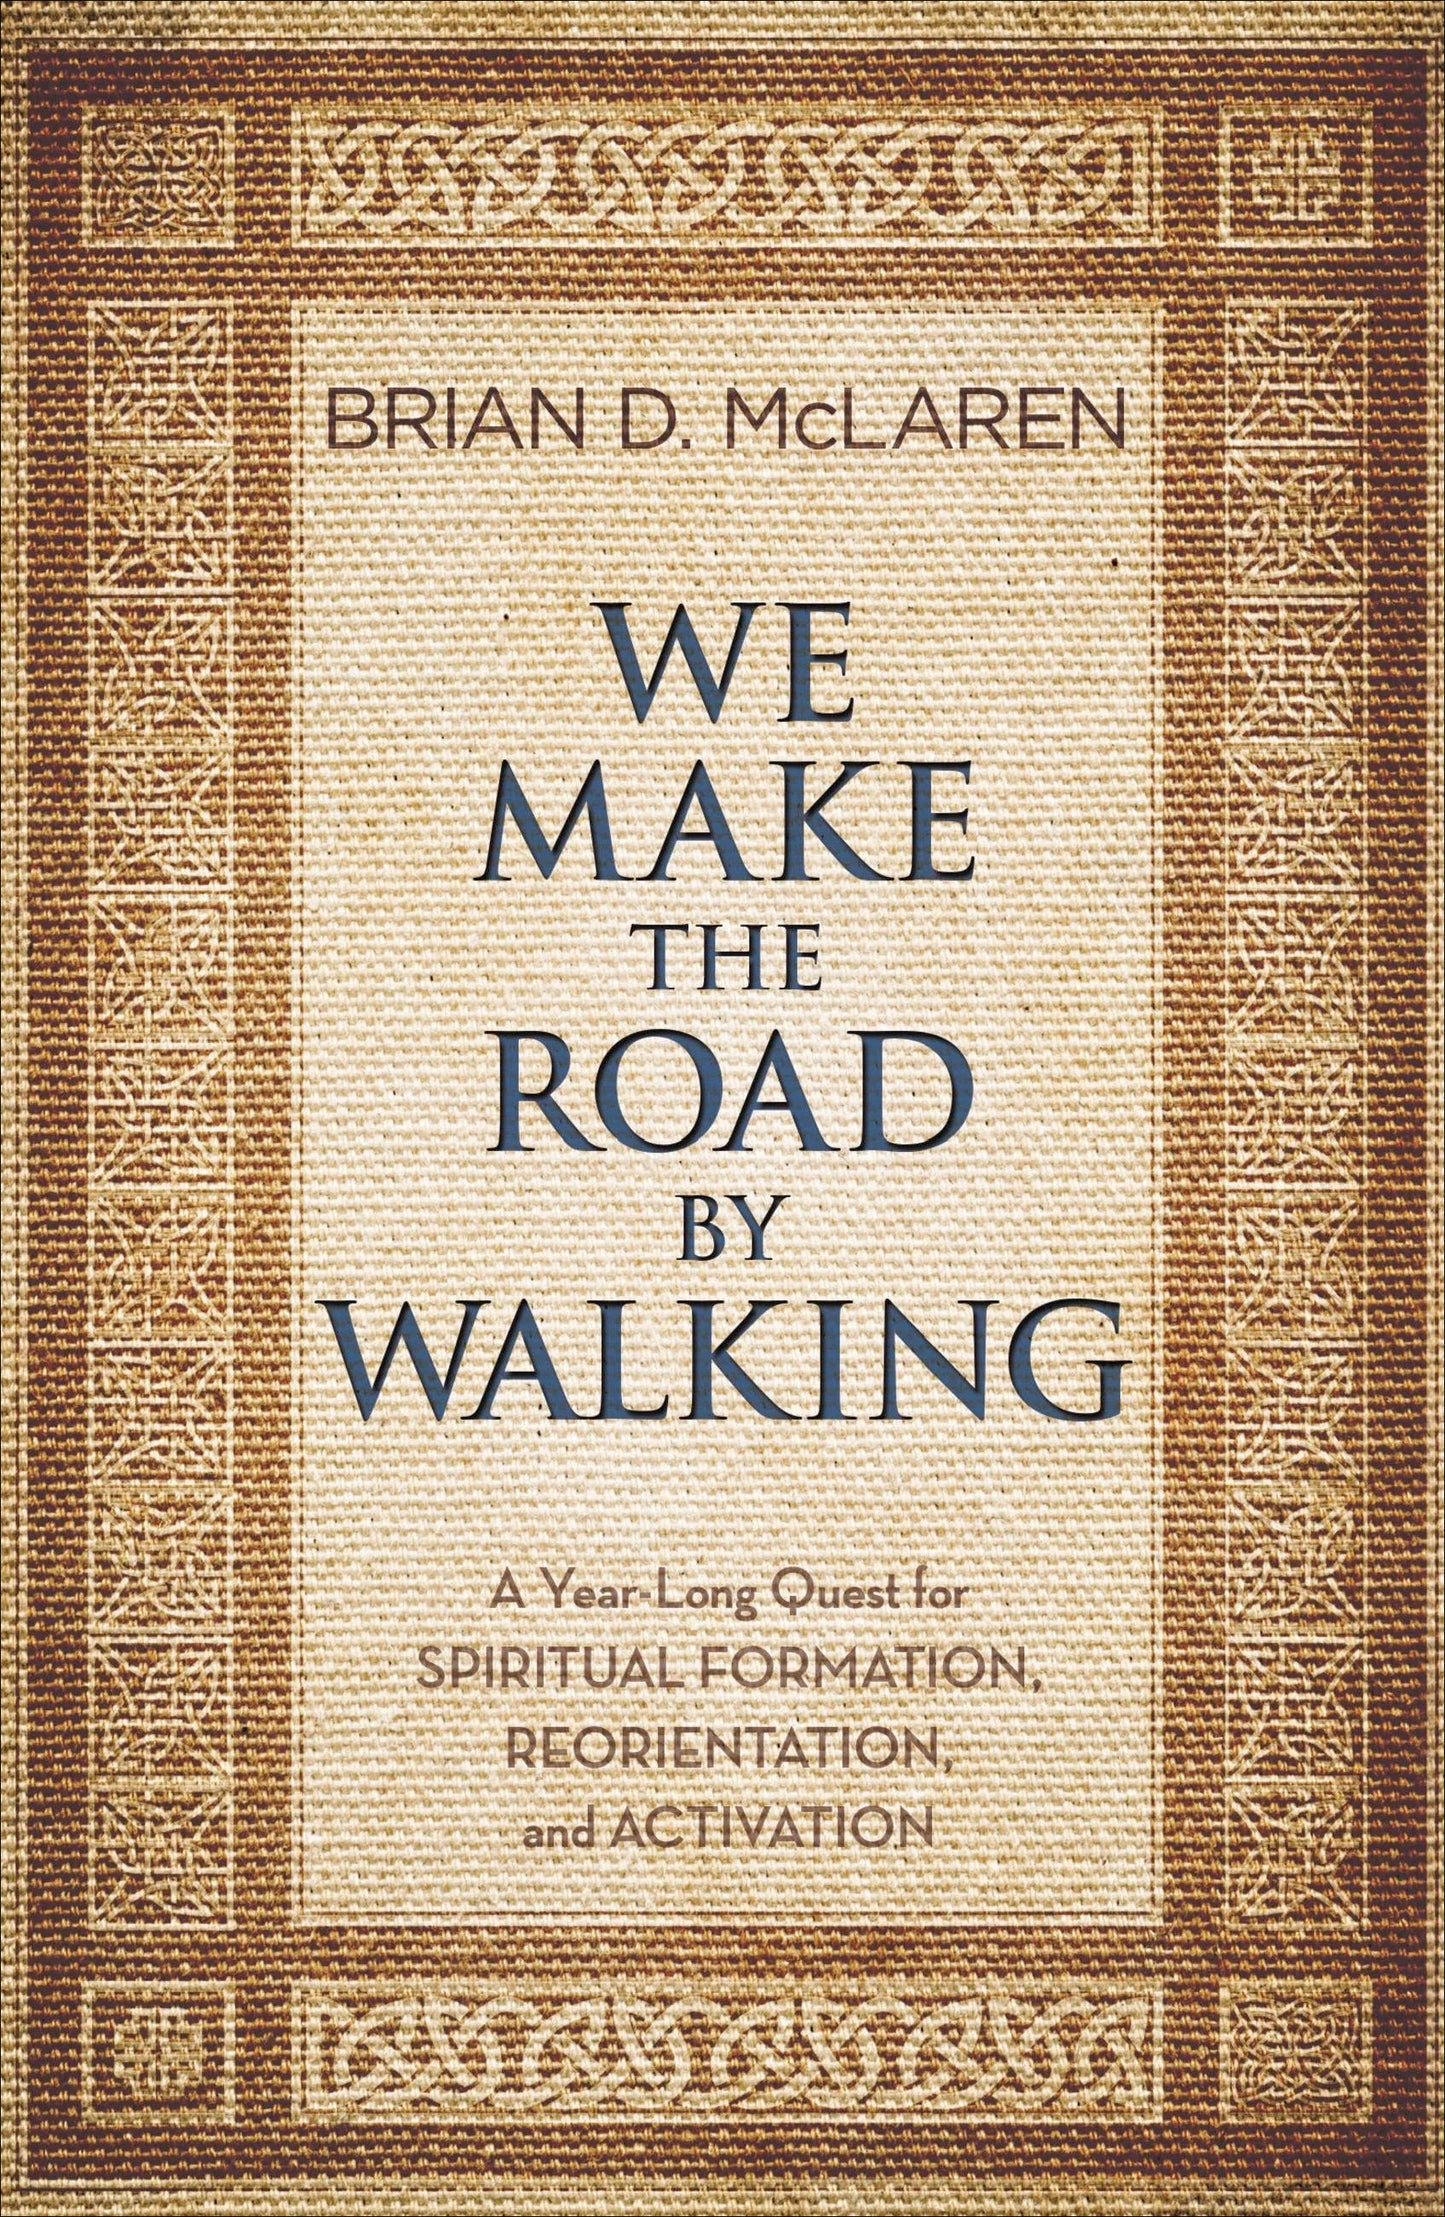 We Make the Road by Walking: A Year-Long Quest for Spiritual Formation, Reorientation, and Activation by Brian D. McLaren